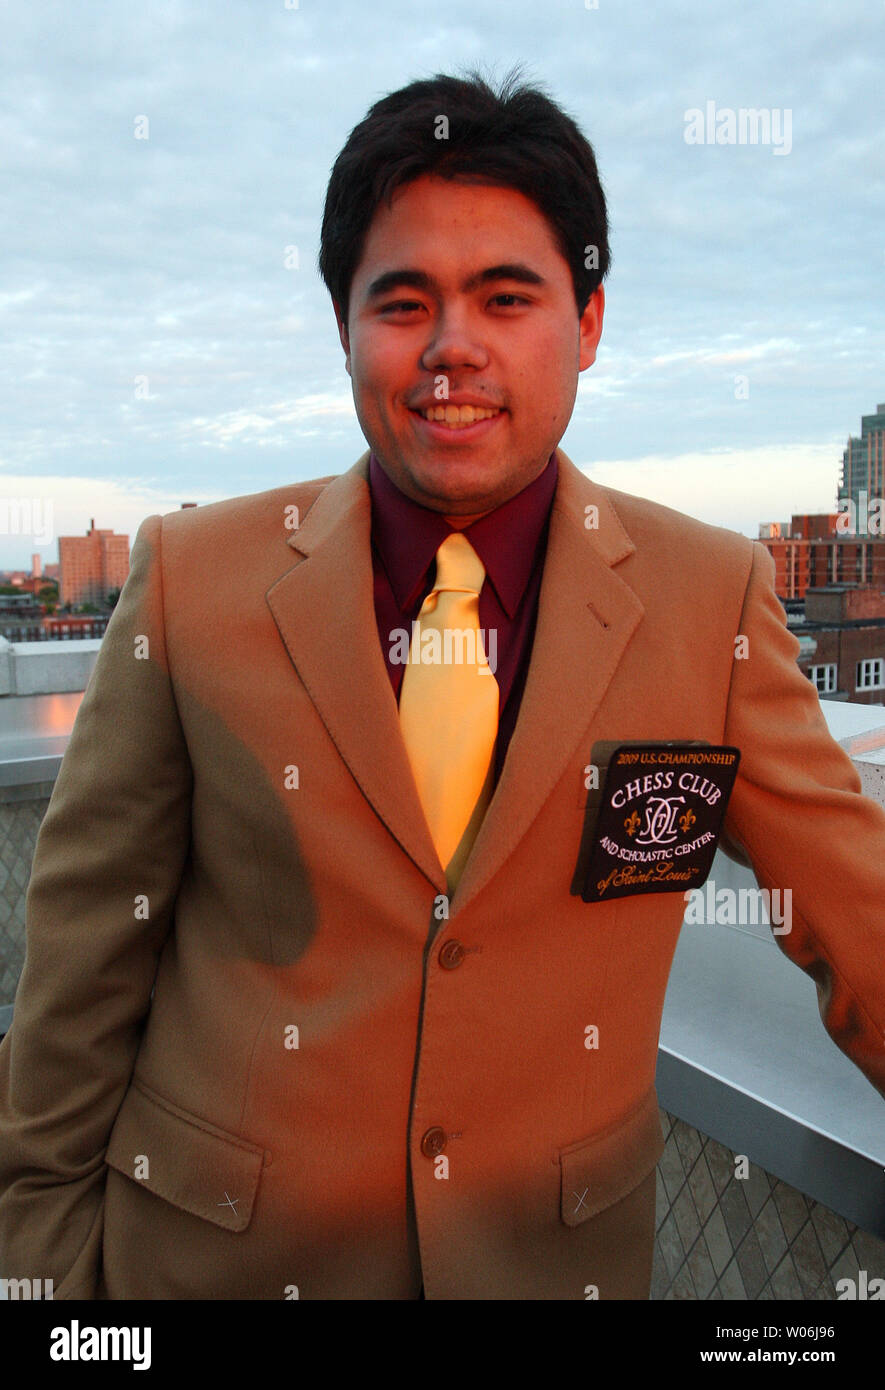 Hikaru Nakamura of White Plains, New York shows off his Brown Jacket after winning the U.S. Chess Championship in St. Louis on May 17, 2009. Nakamura beat out 25 others from across the United States to win the invitational tournament. (UPI Photo/Bill Greenblatt) Stock Photo